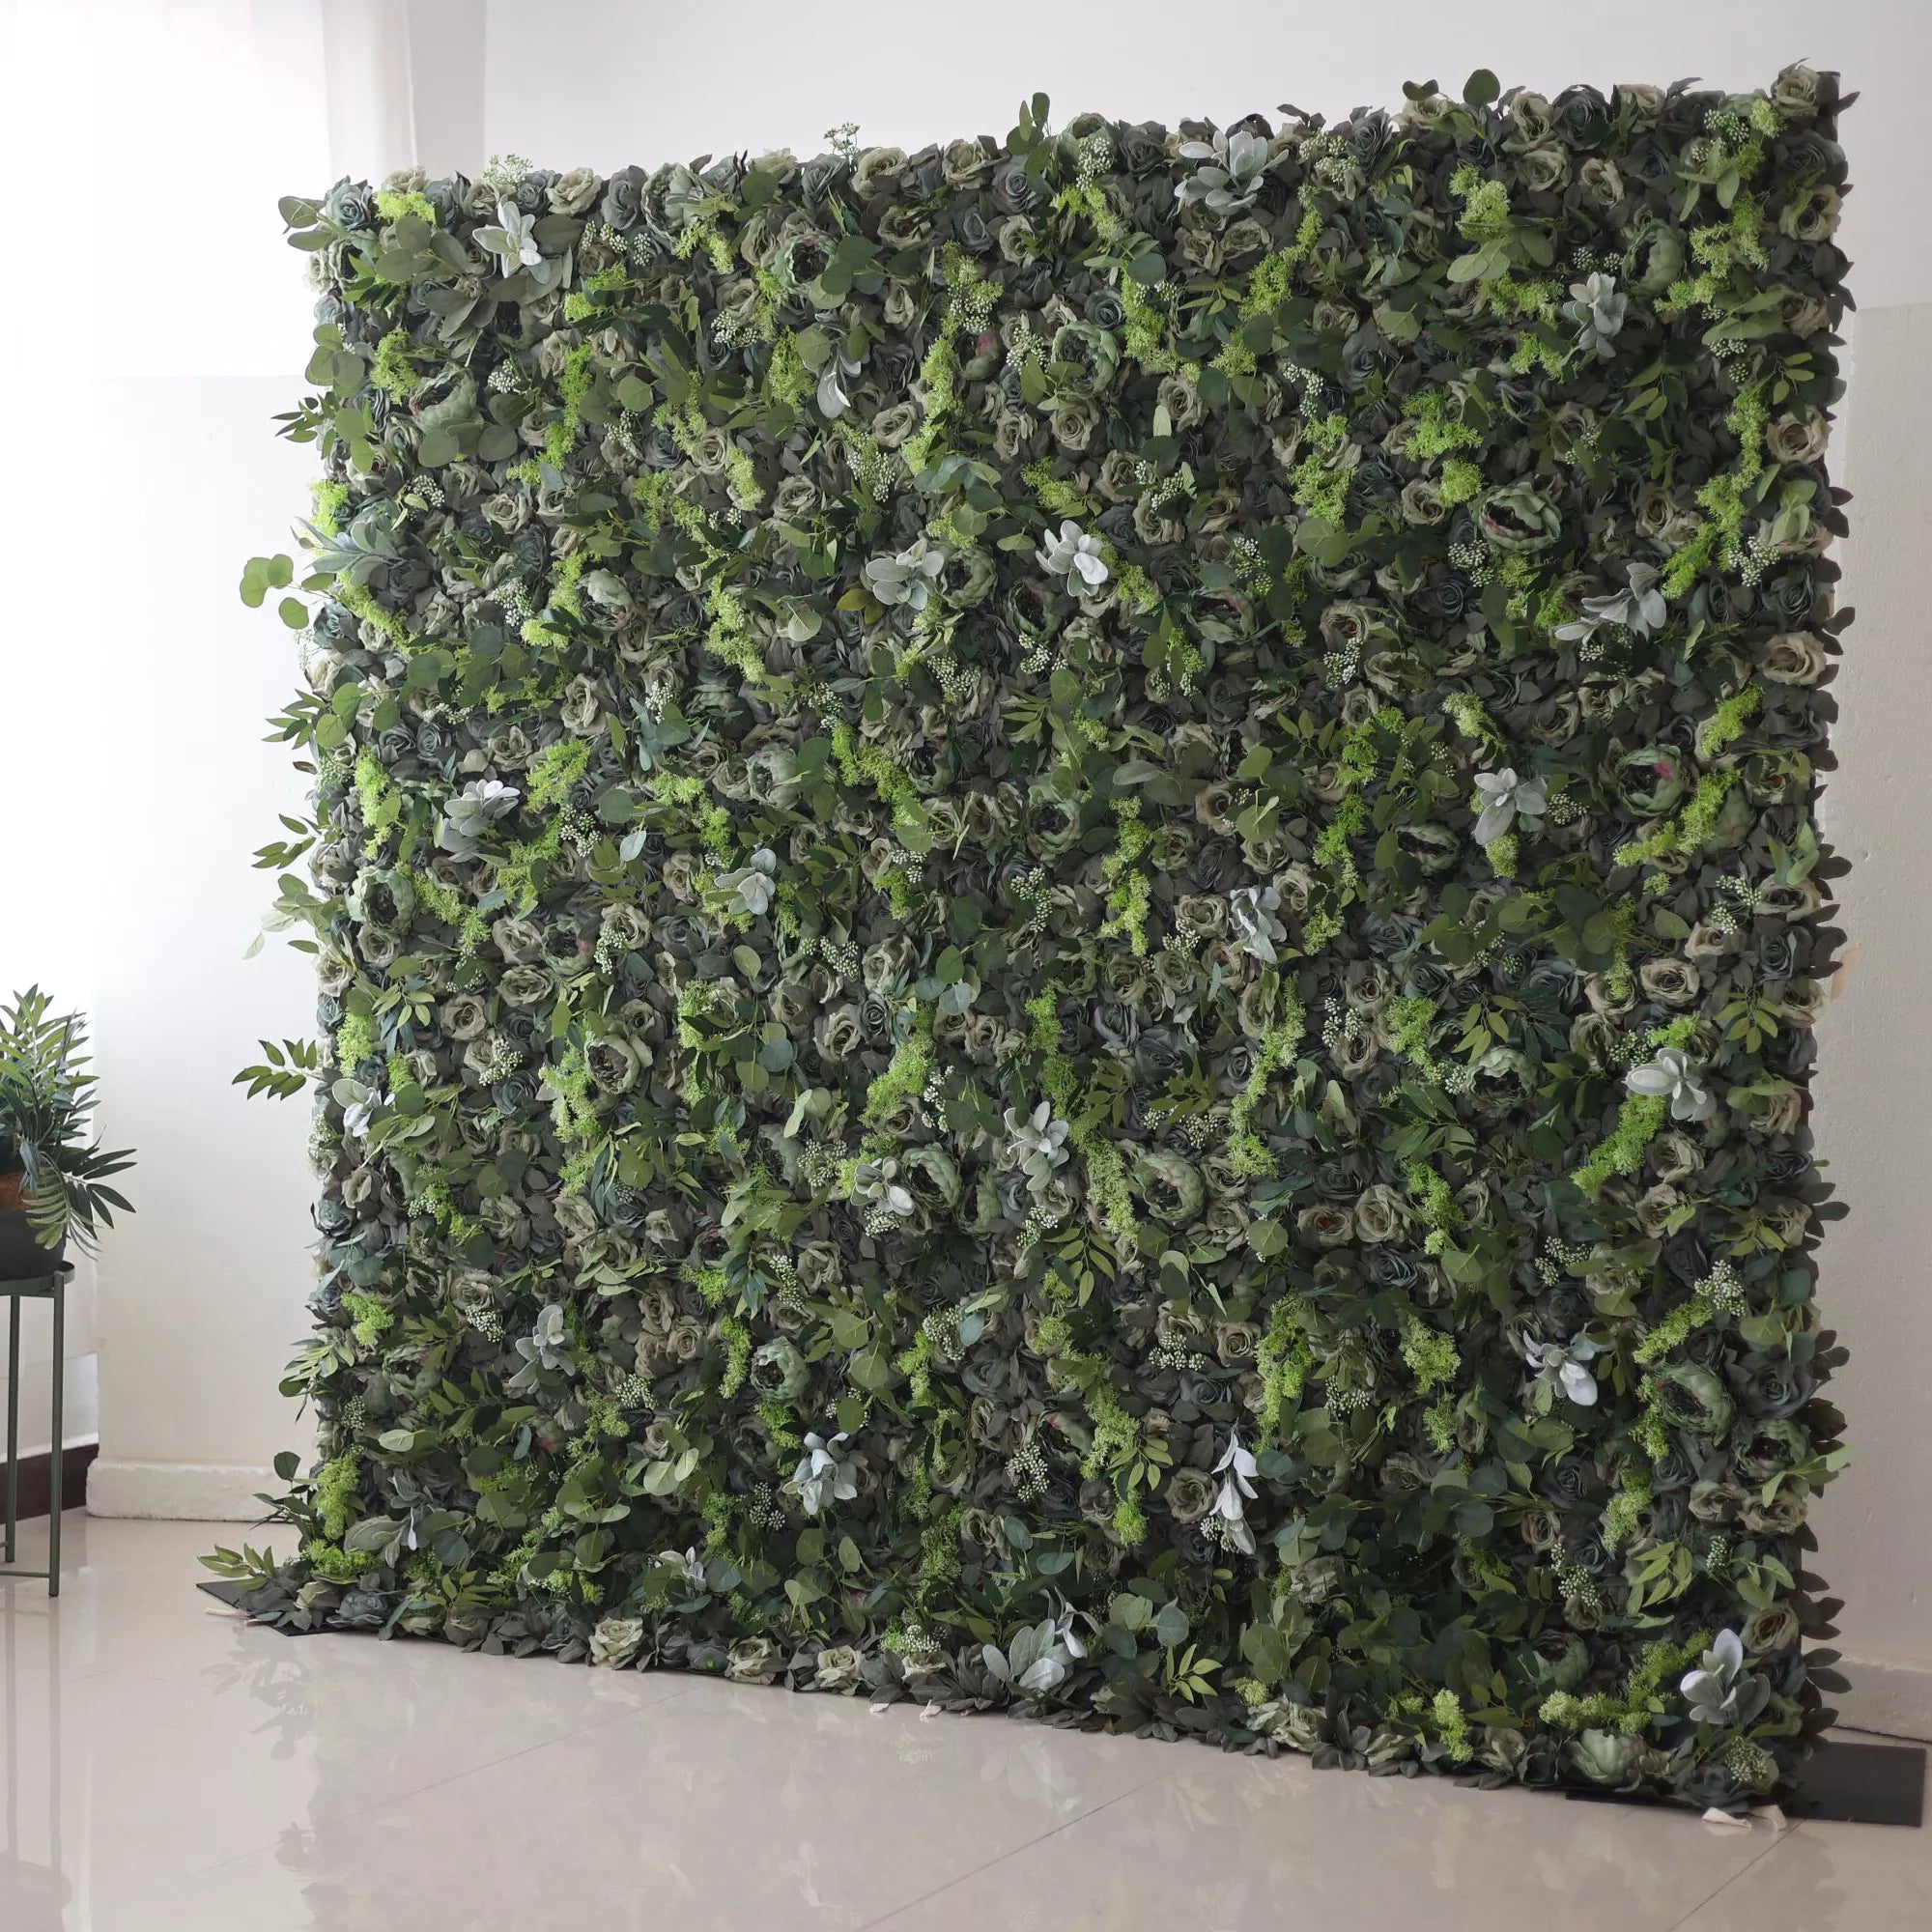 Valar Flowers' Enchanted Forest: A rich tapestry of diverse greenery with white floral nuances. The ideal wall for botanical themes and nature-infused interiors.